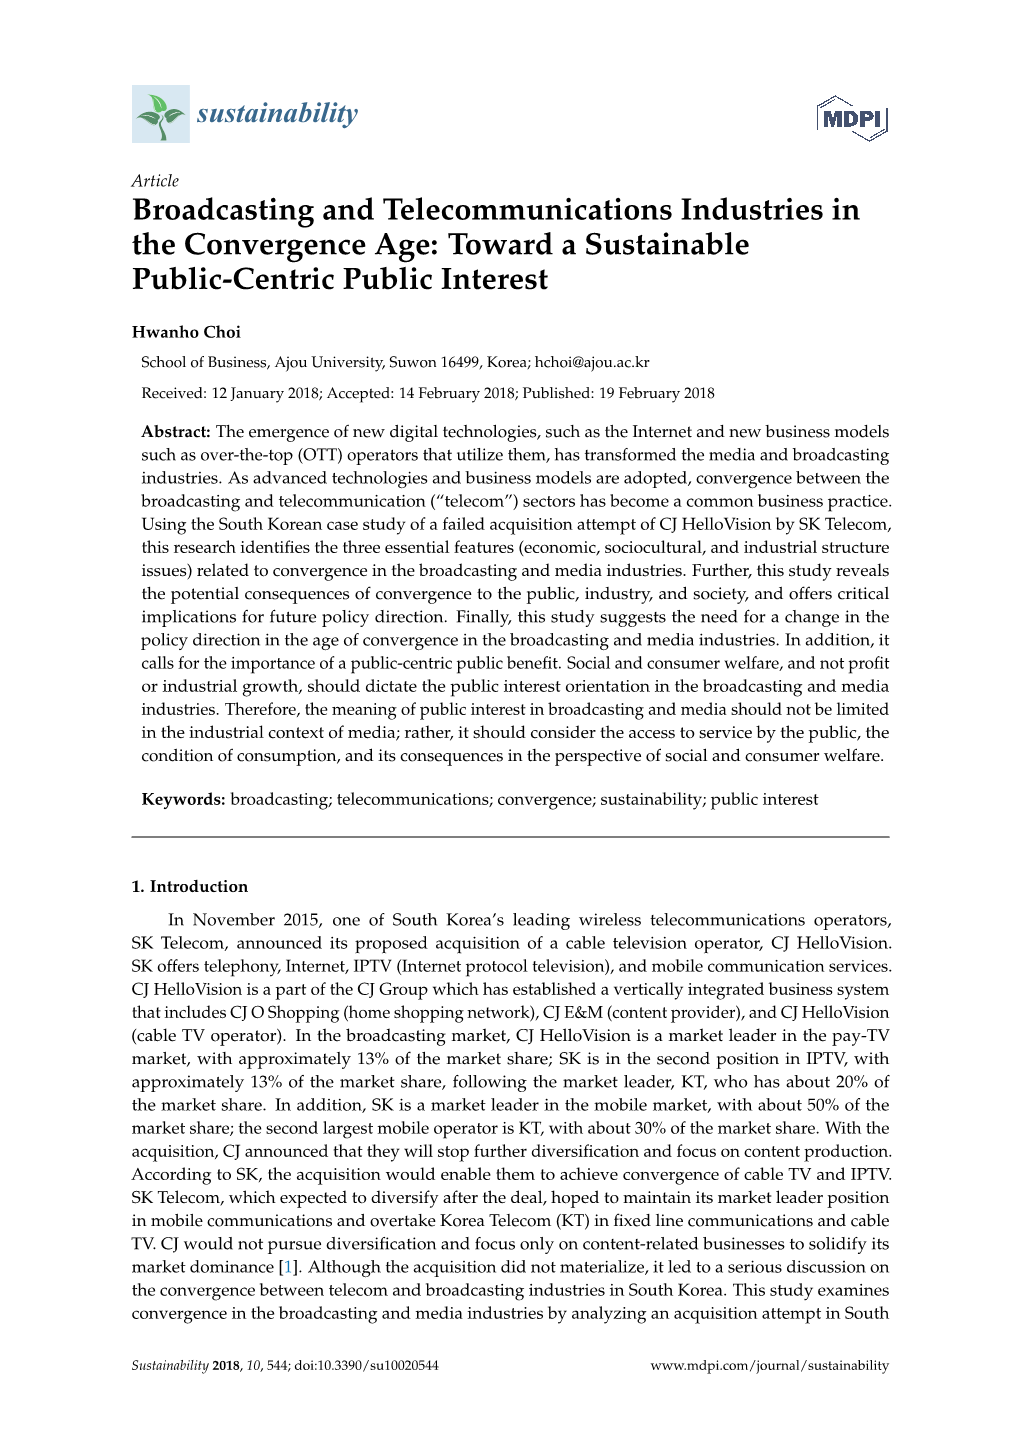 Broadcasting and Telecommunications Industries in the Convergence Age: Toward a Sustainable Public-Centric Public Interest